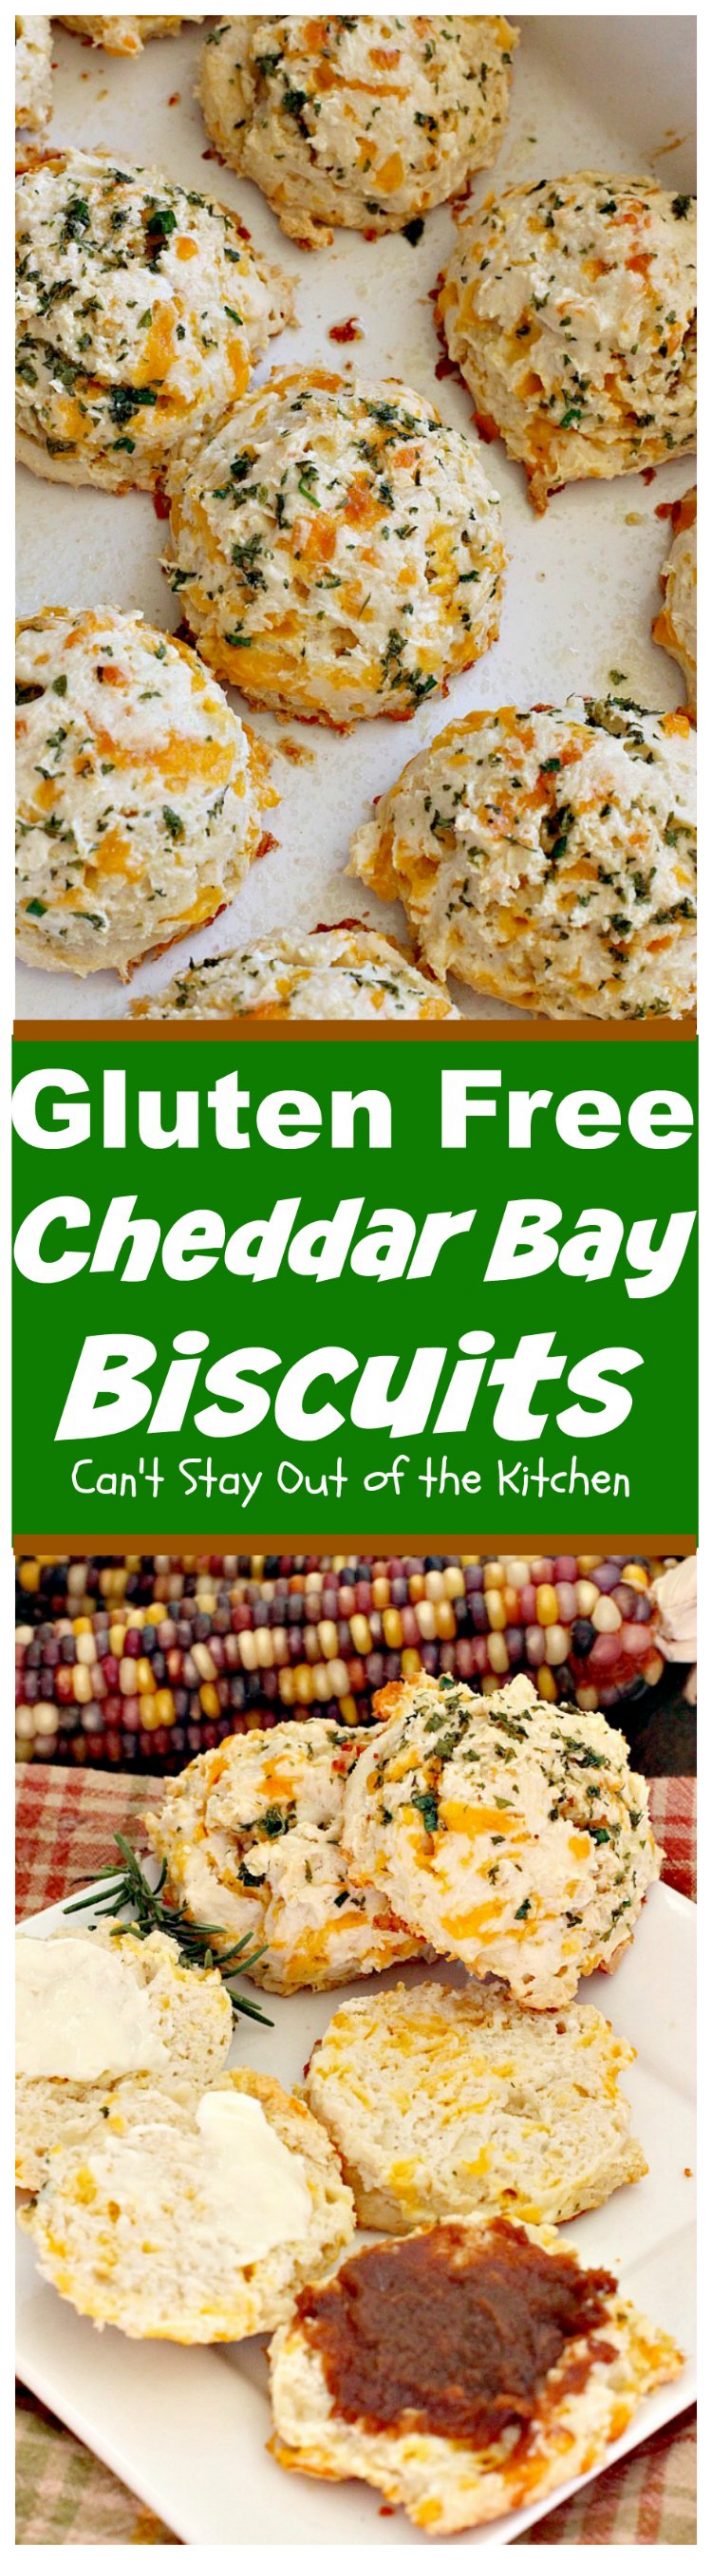 Gluten Free Cheddar Bay Biscuits | Can't Stay Out of the Kitchen